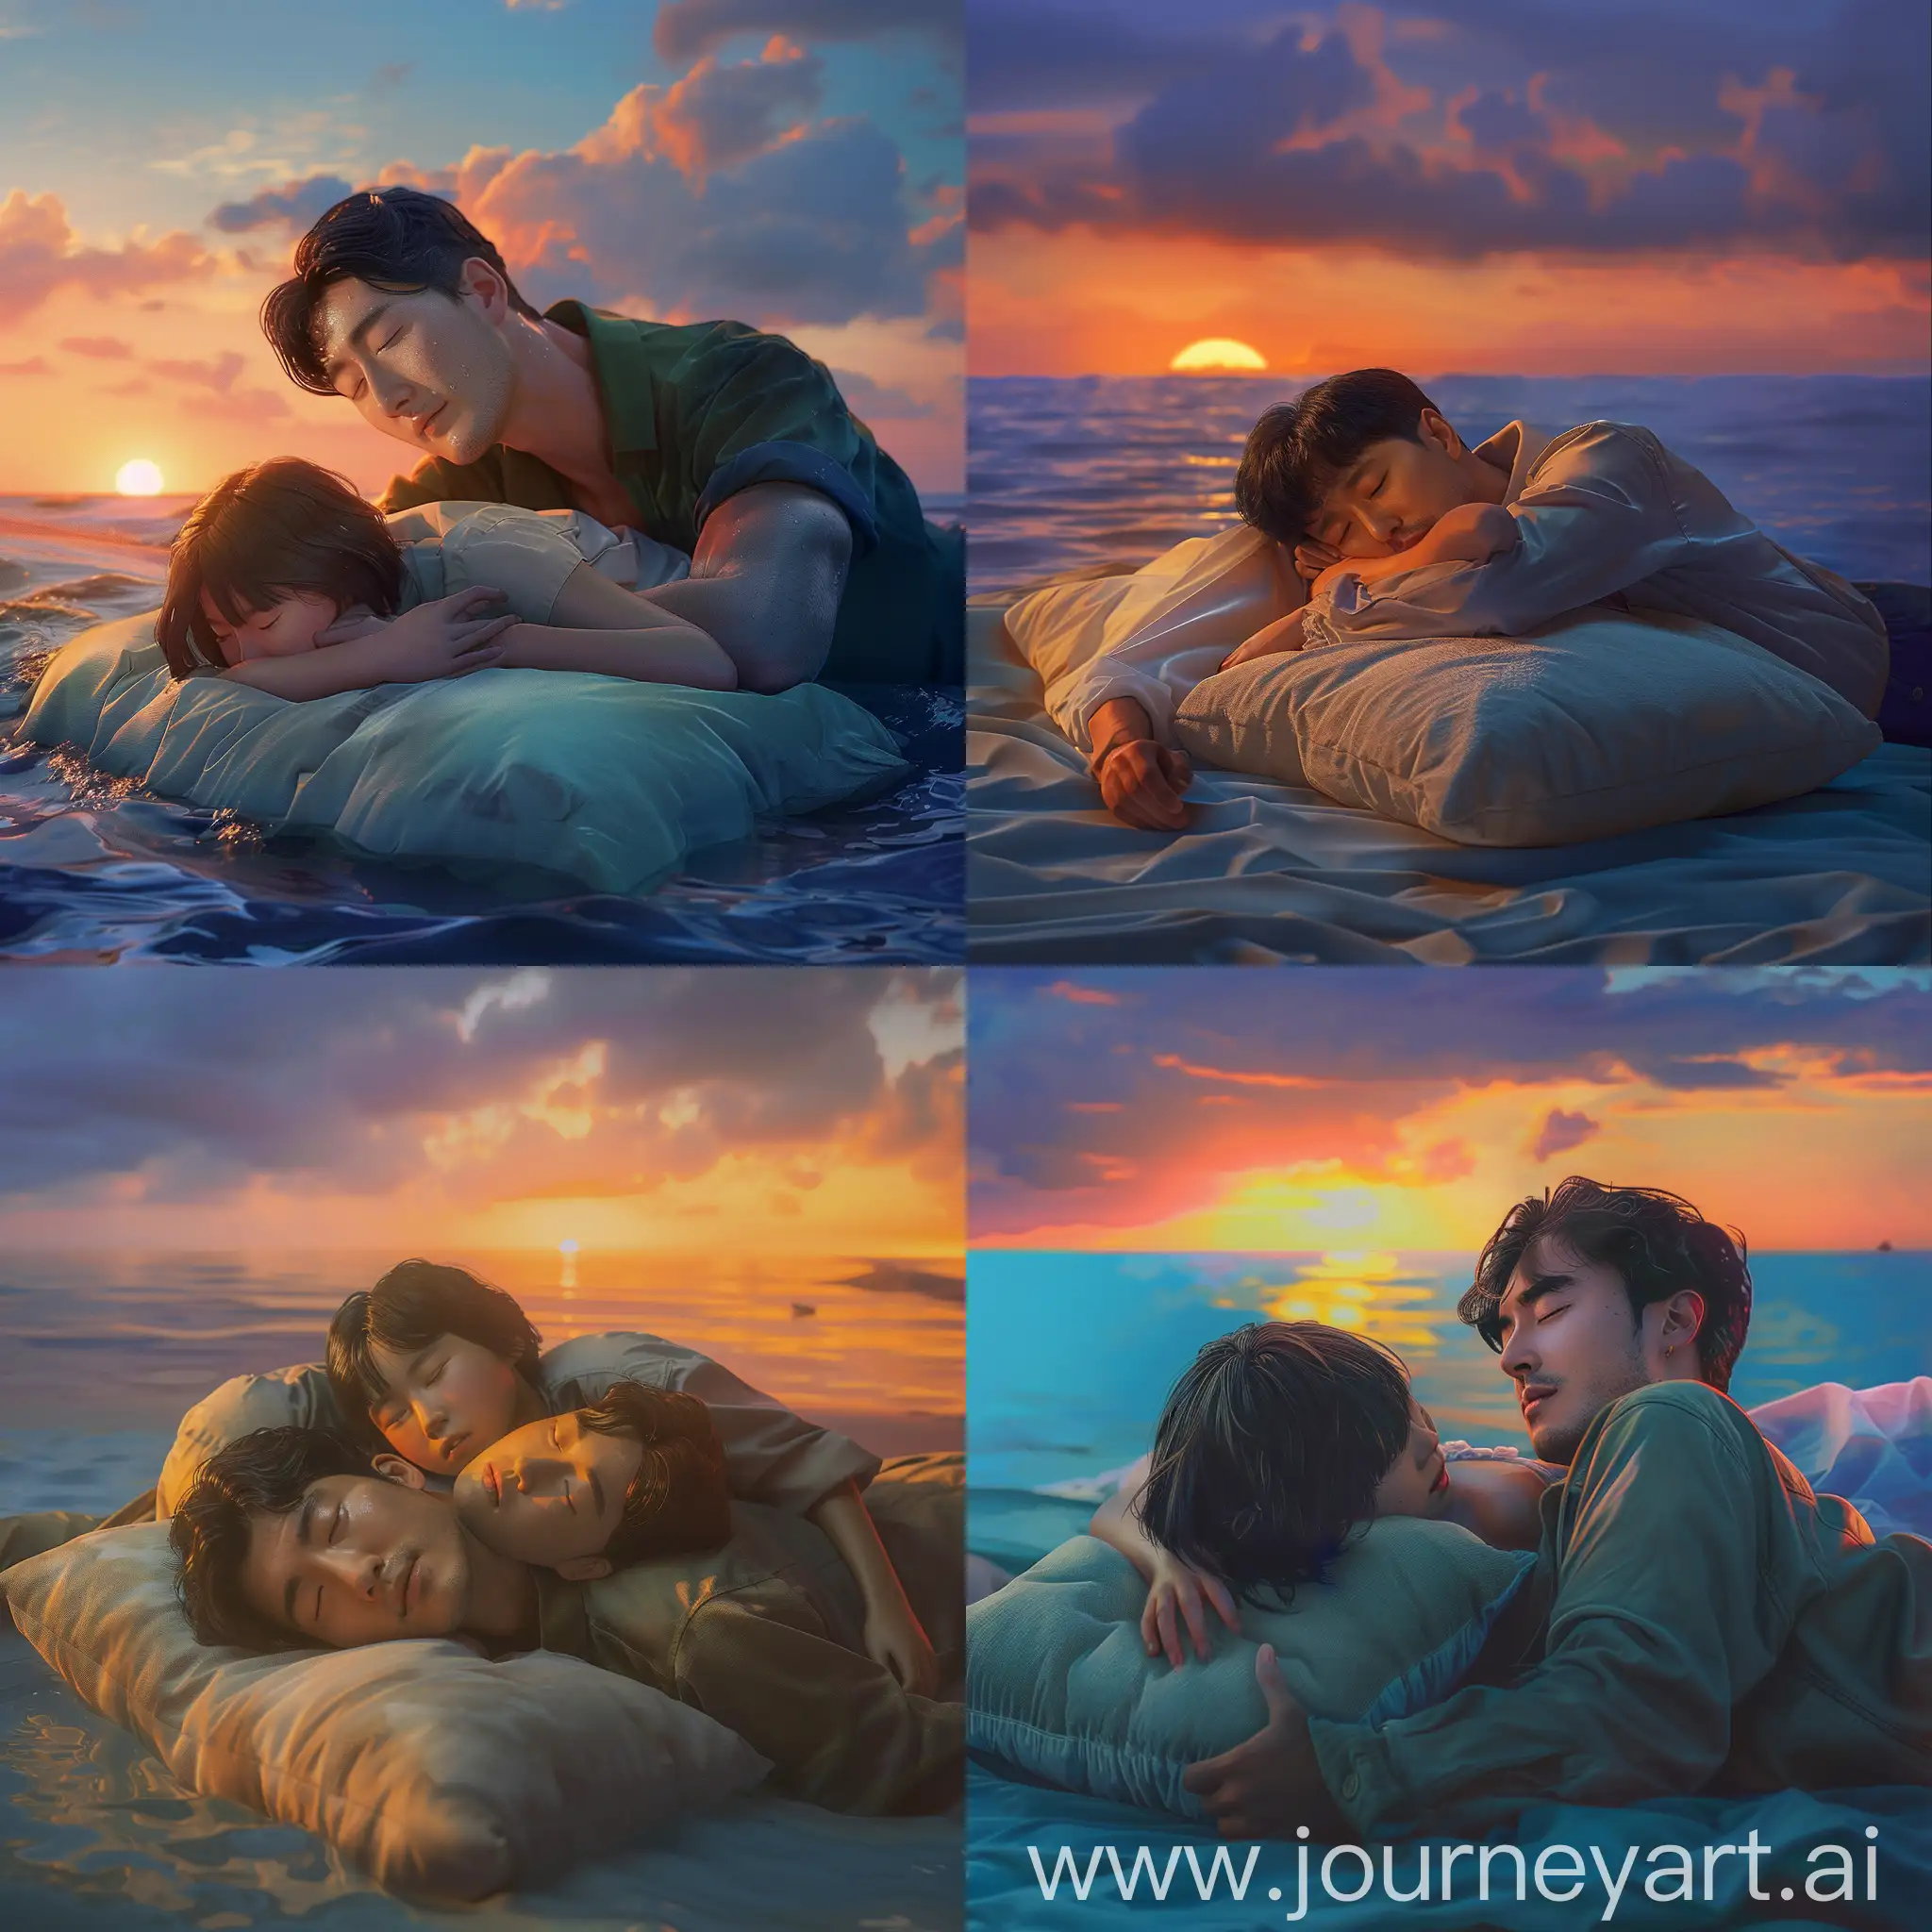 A photorealistic realistic korean man lying on a soft pillow on an azure beach at sunset with a girl with short dark hair in his arms. Her face is not visible.